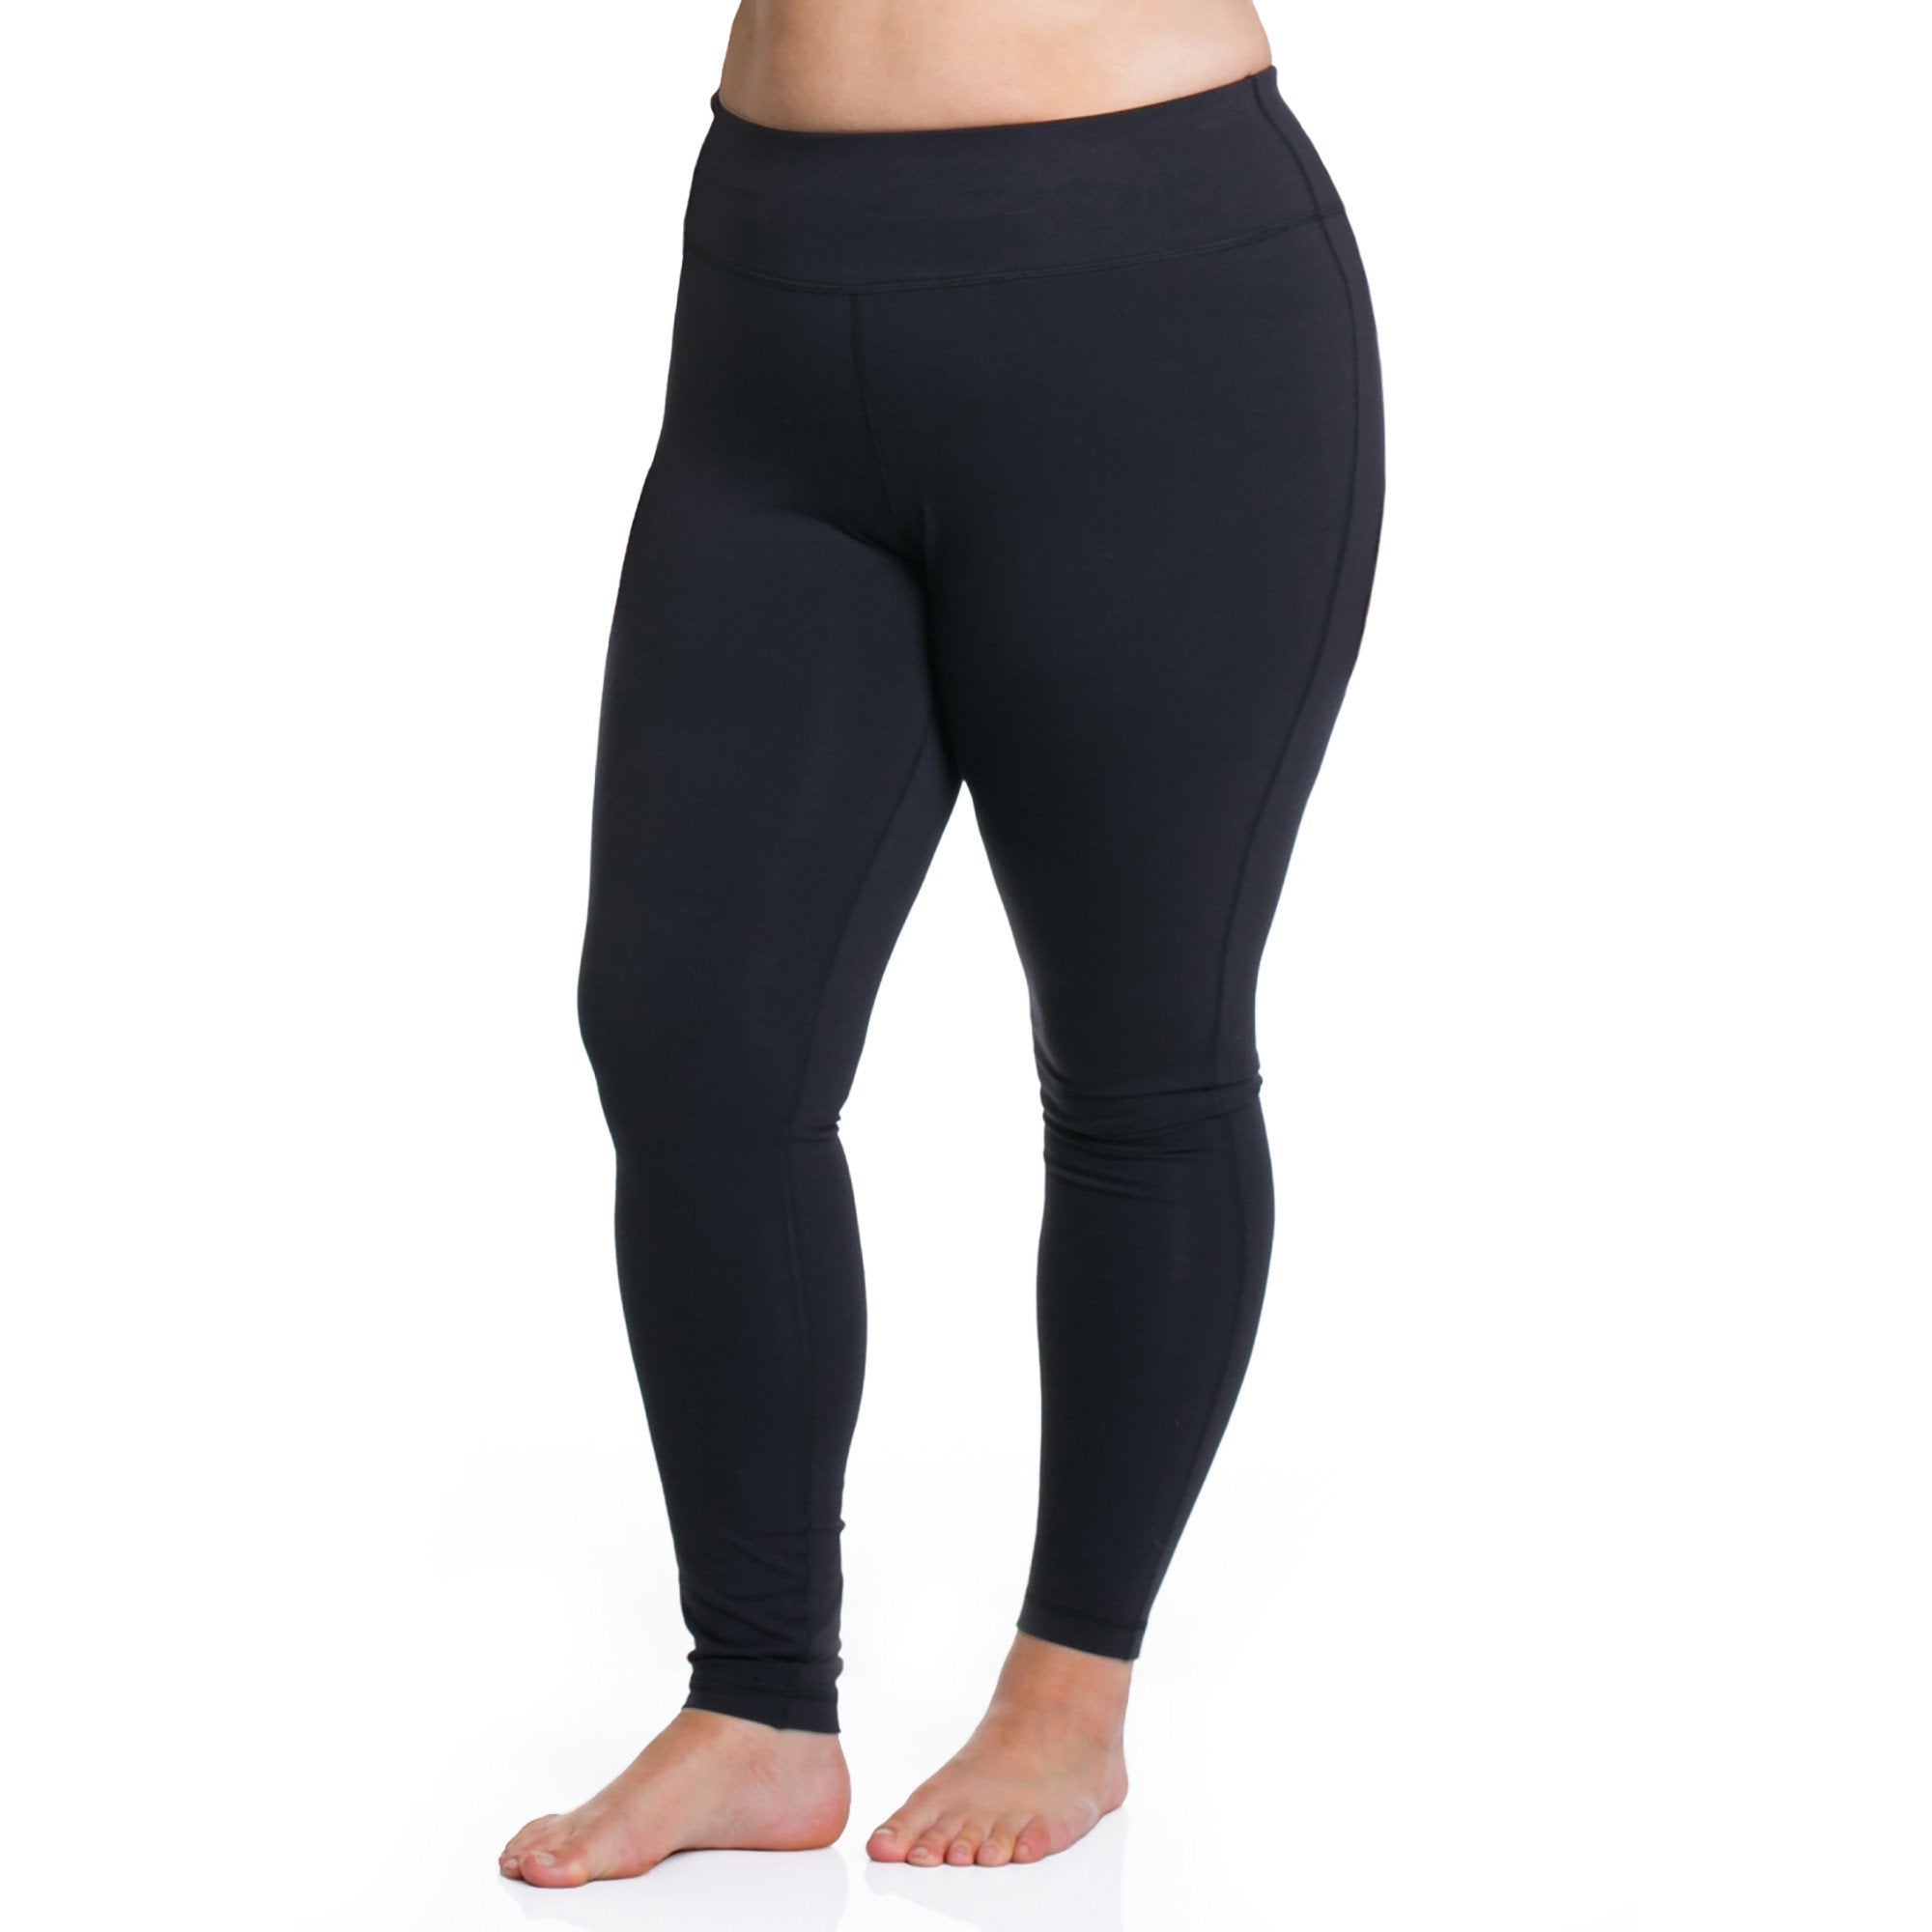 Share more than 220 cotton workout leggings latest